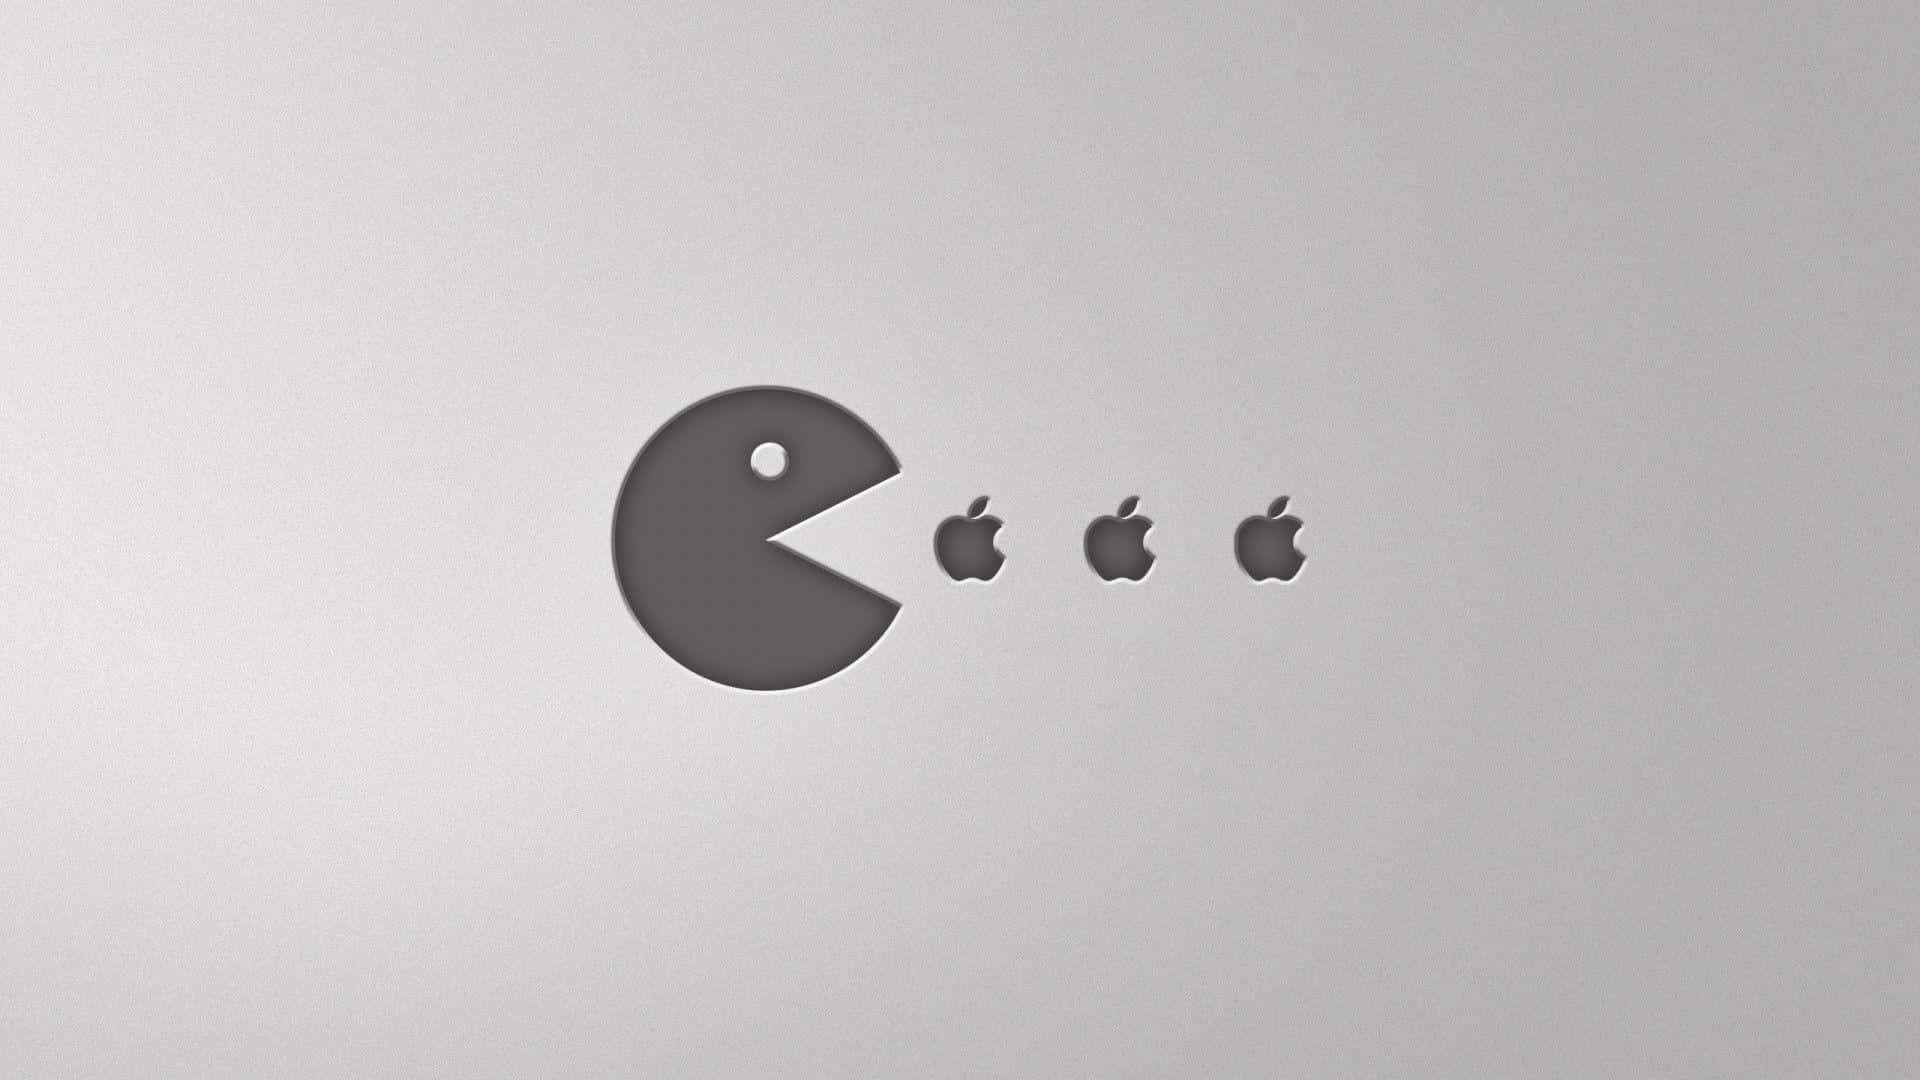 Aesthetic Pac Man And Apple Theme Design Wallpaper